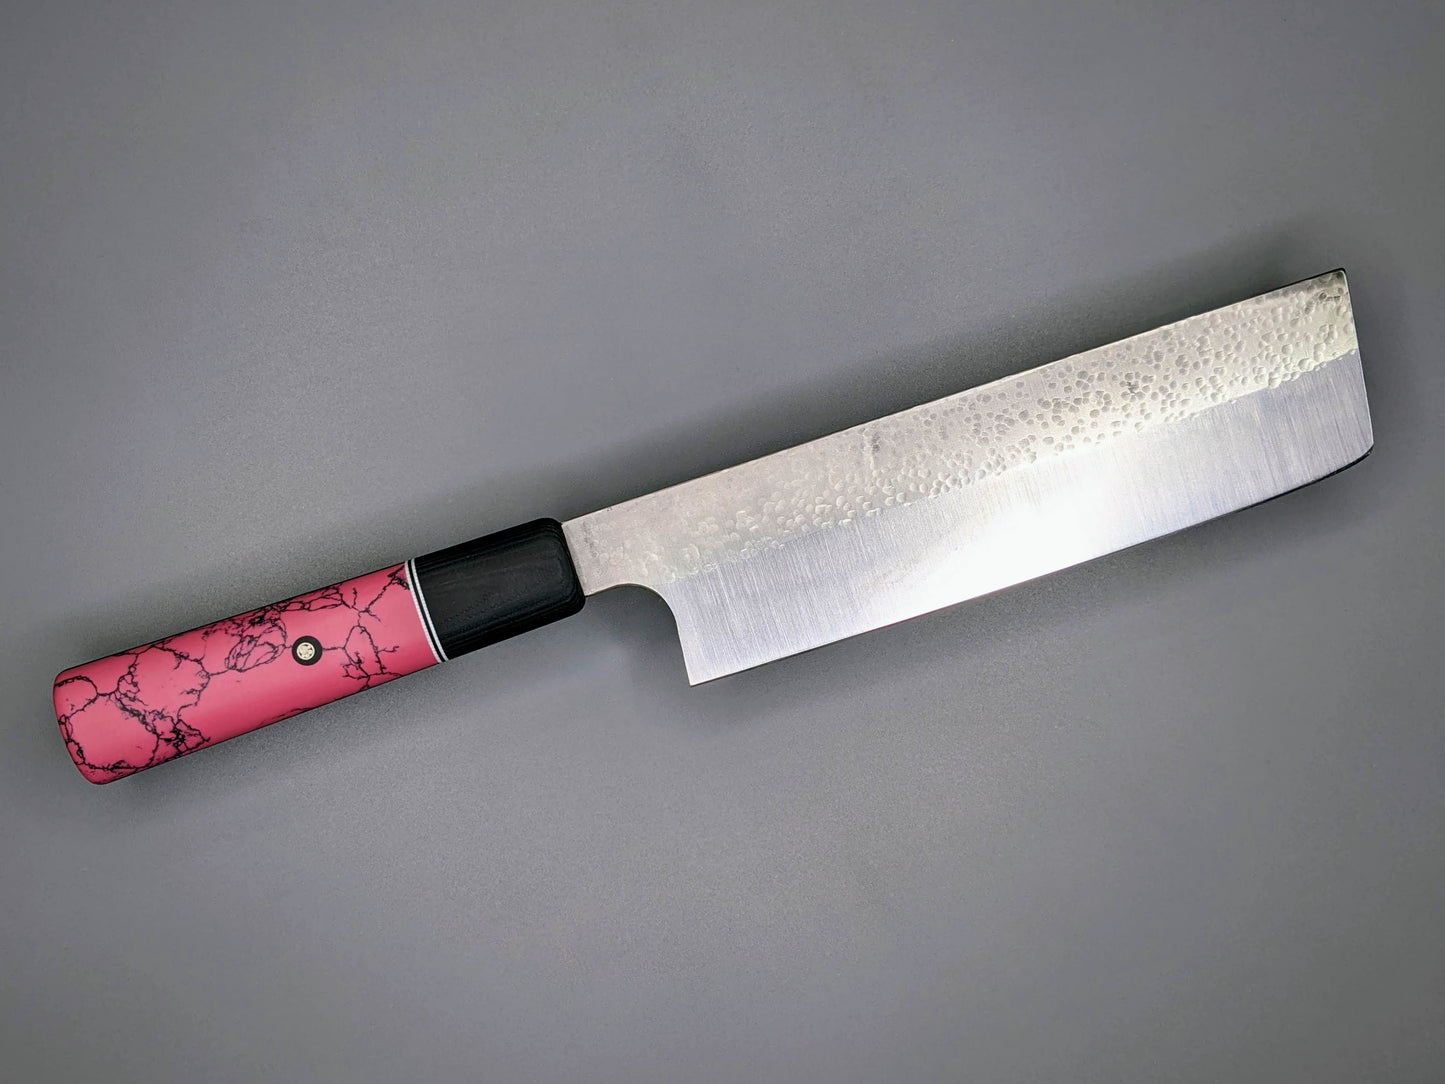 Japanese Nakiri with pink handle on a gray background.